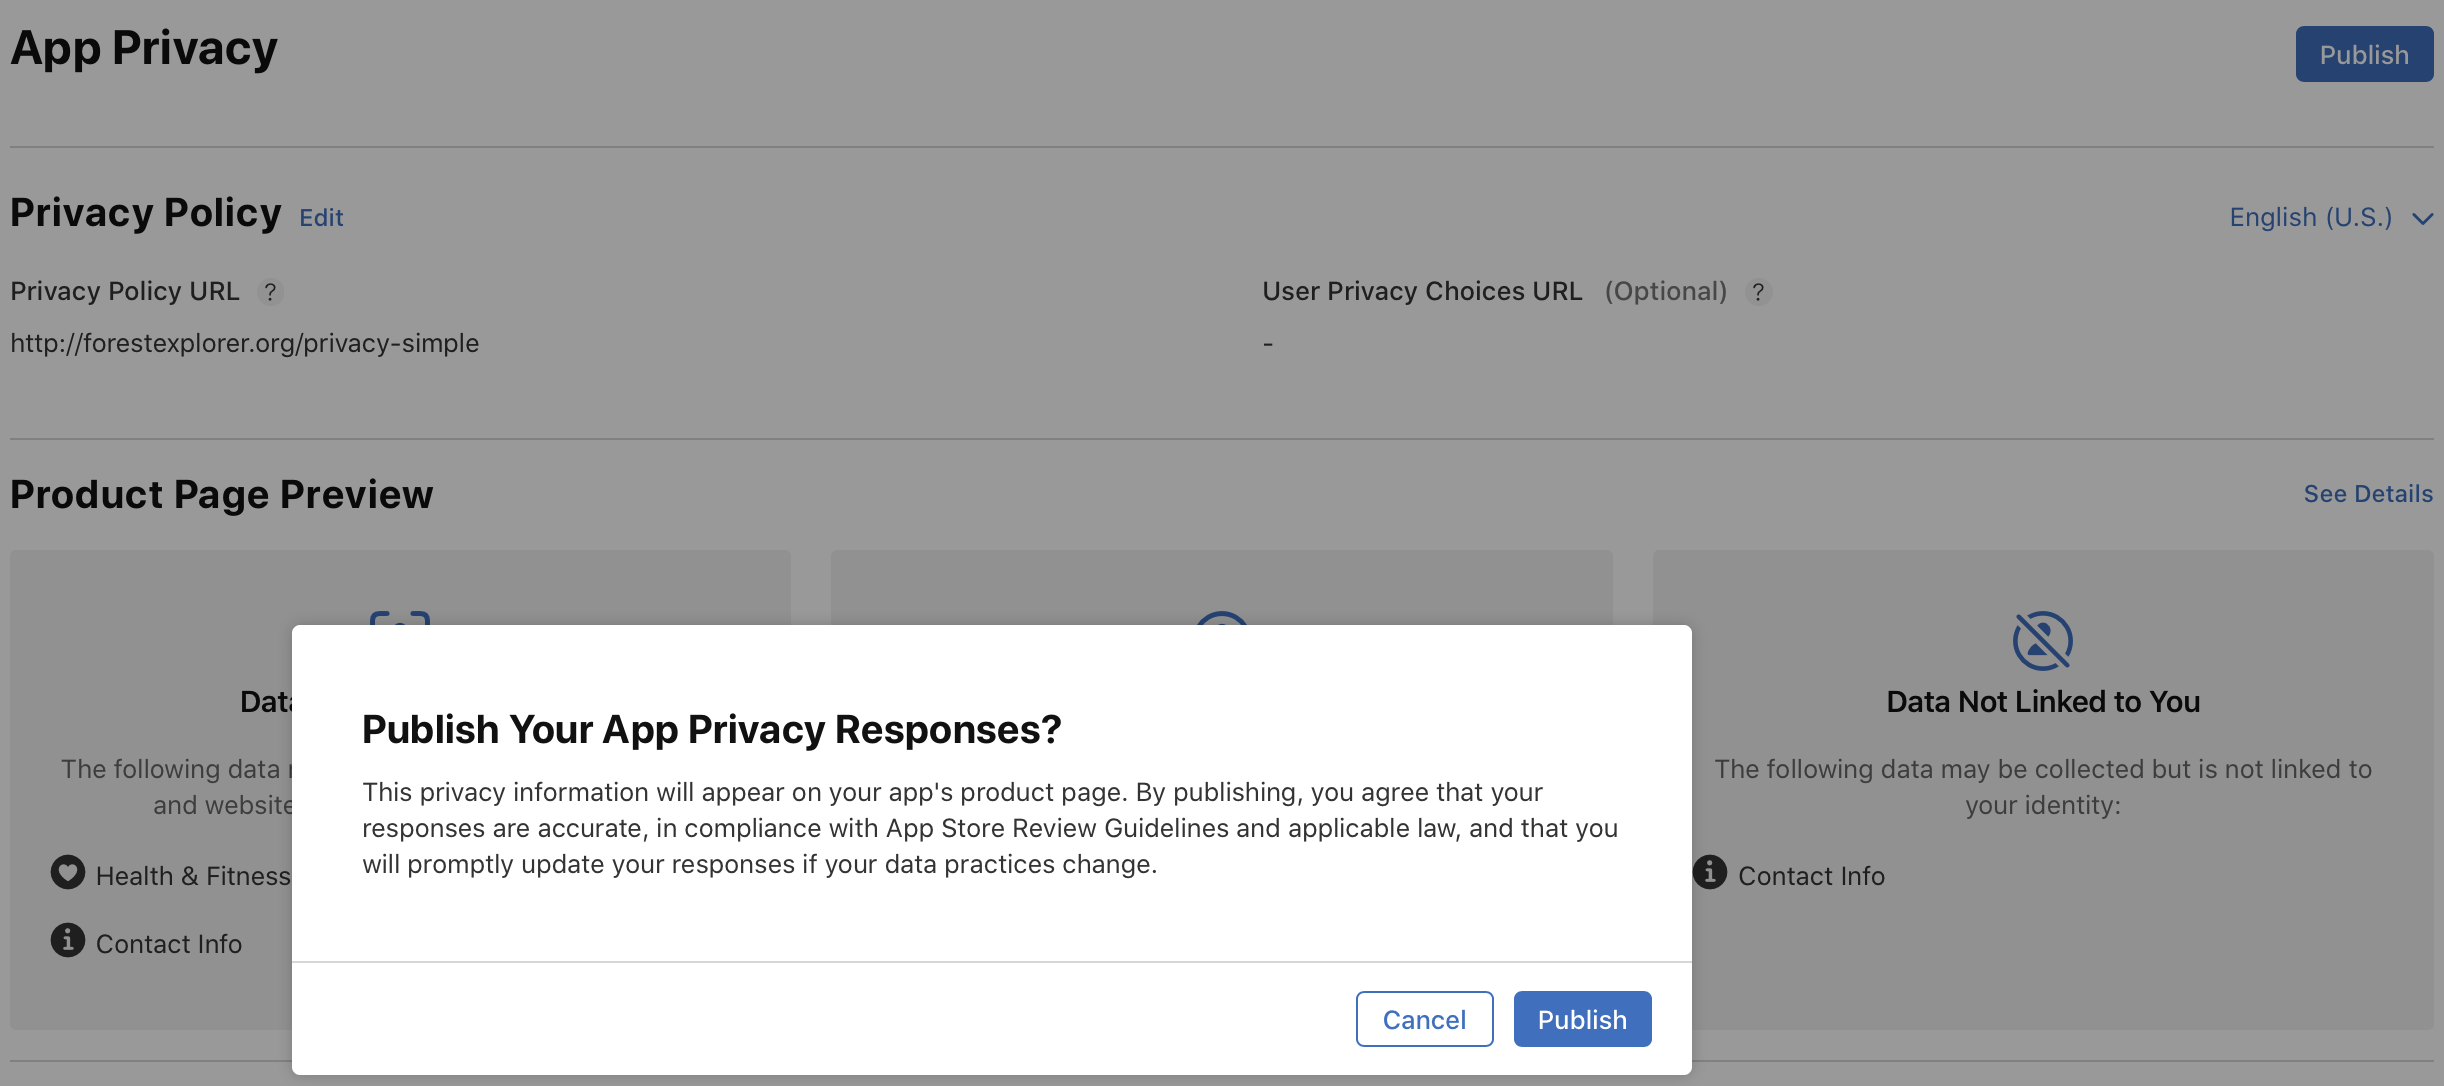 Publish Your App Privacy Response dialog on the App Privacy page.